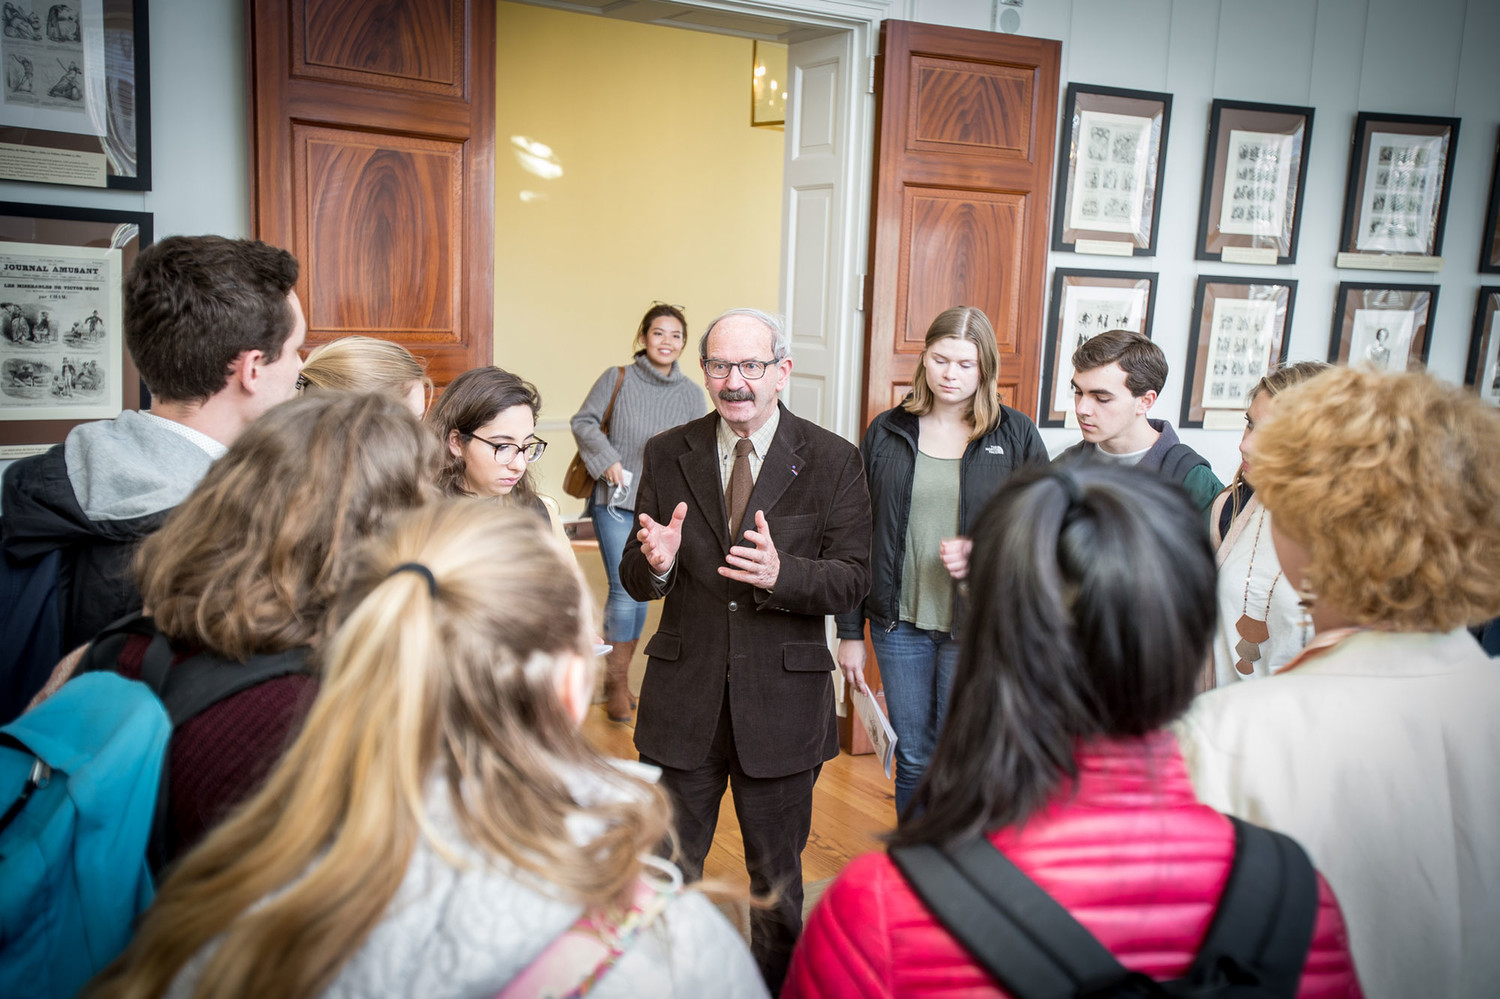 Gérard Prochain lecturing to a group of UVA students on the caricature exhibition in the Rotunda 